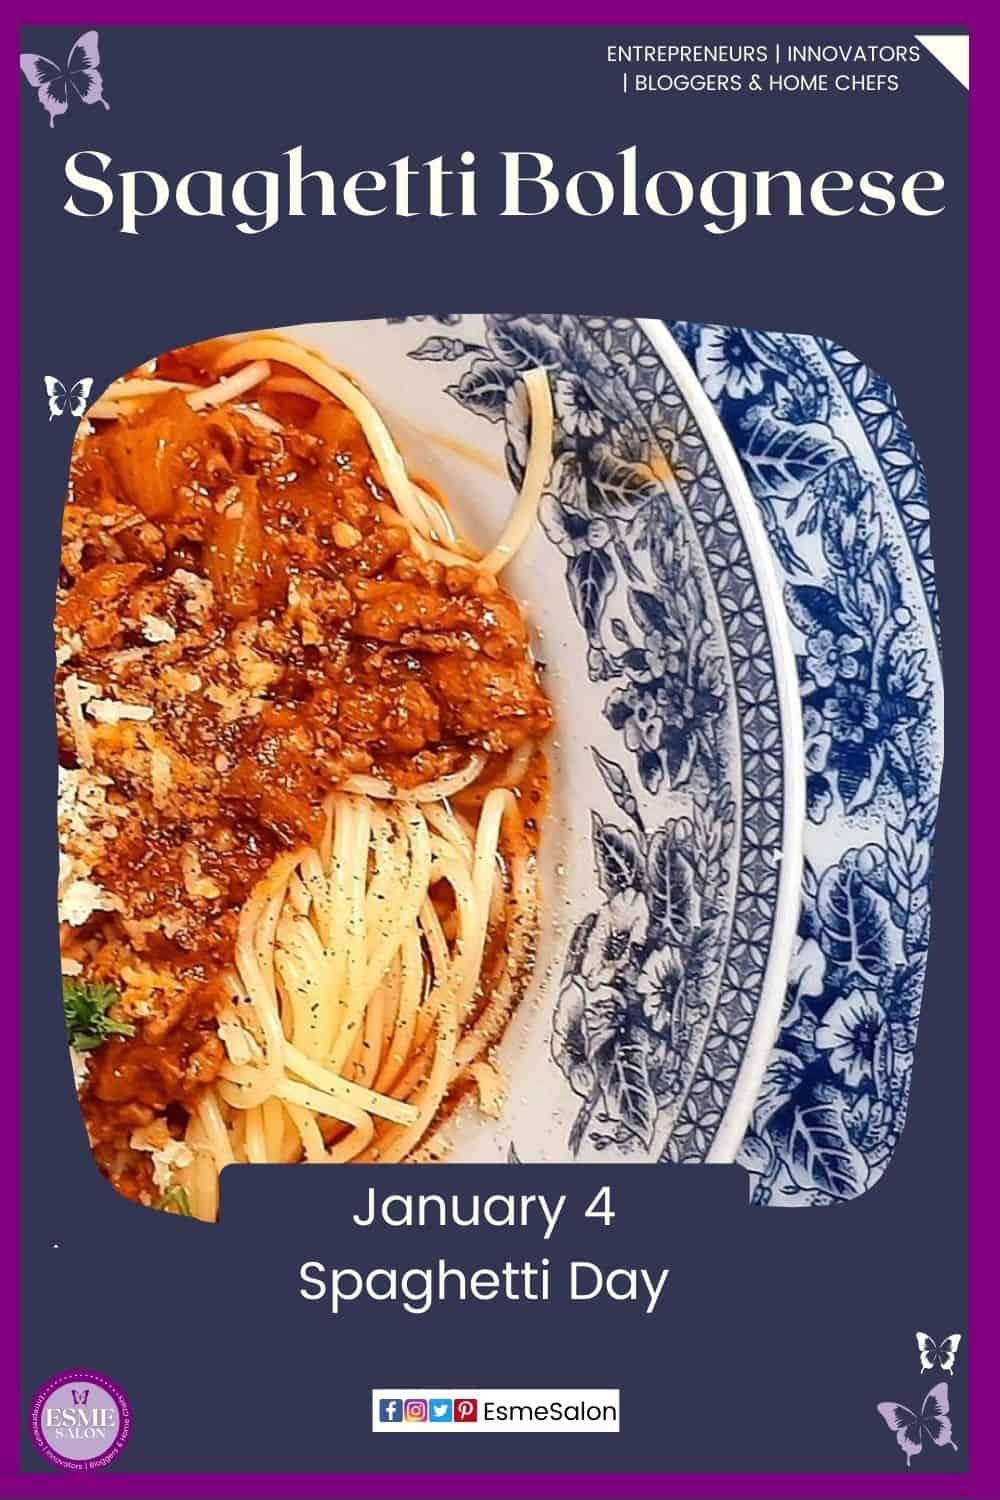 an image of a blue delft plate filled with Traditional Classic Spaghetti Bolognese